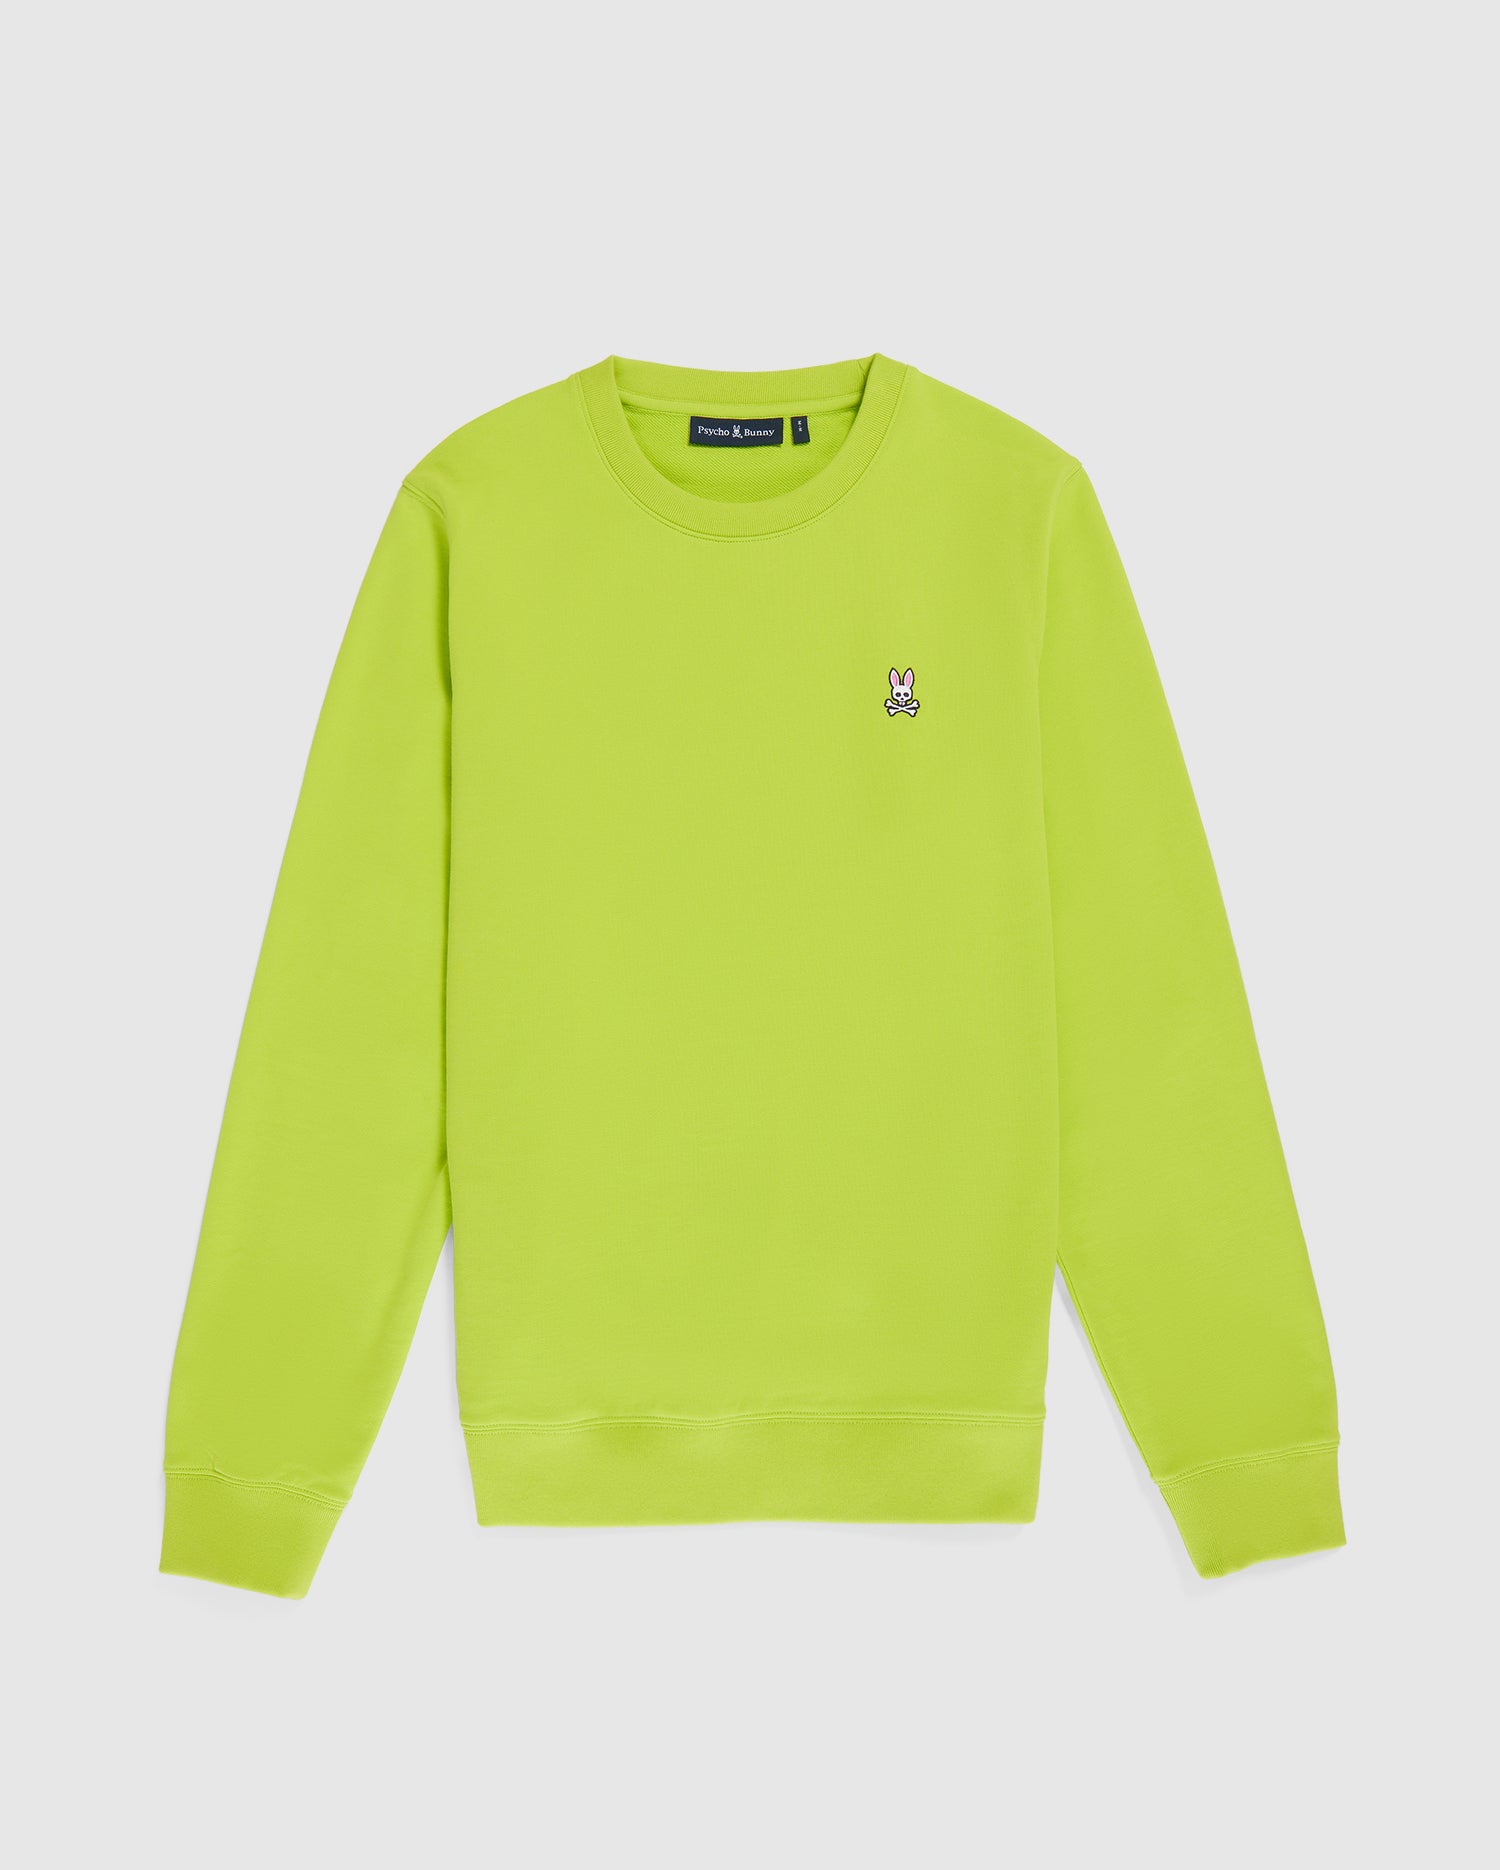 MENS LIME FRENCH TERRY SWEATSHIRT | PSYCHO BUNNY